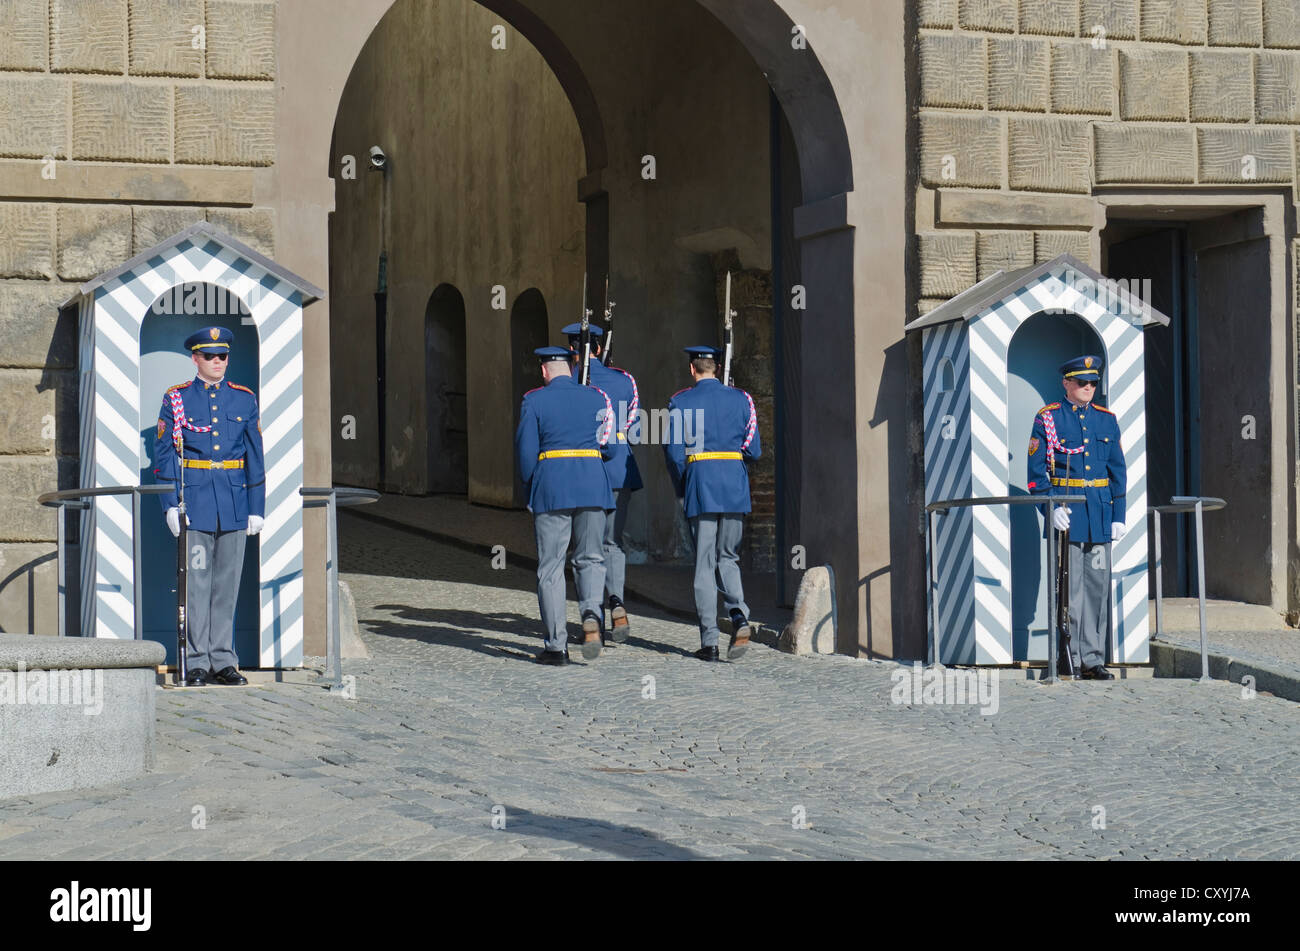 Changing of the guards at the entrance gate to the Hradcany, the Castle District, hight above the city, Prague, Czech Republic Stock Photo